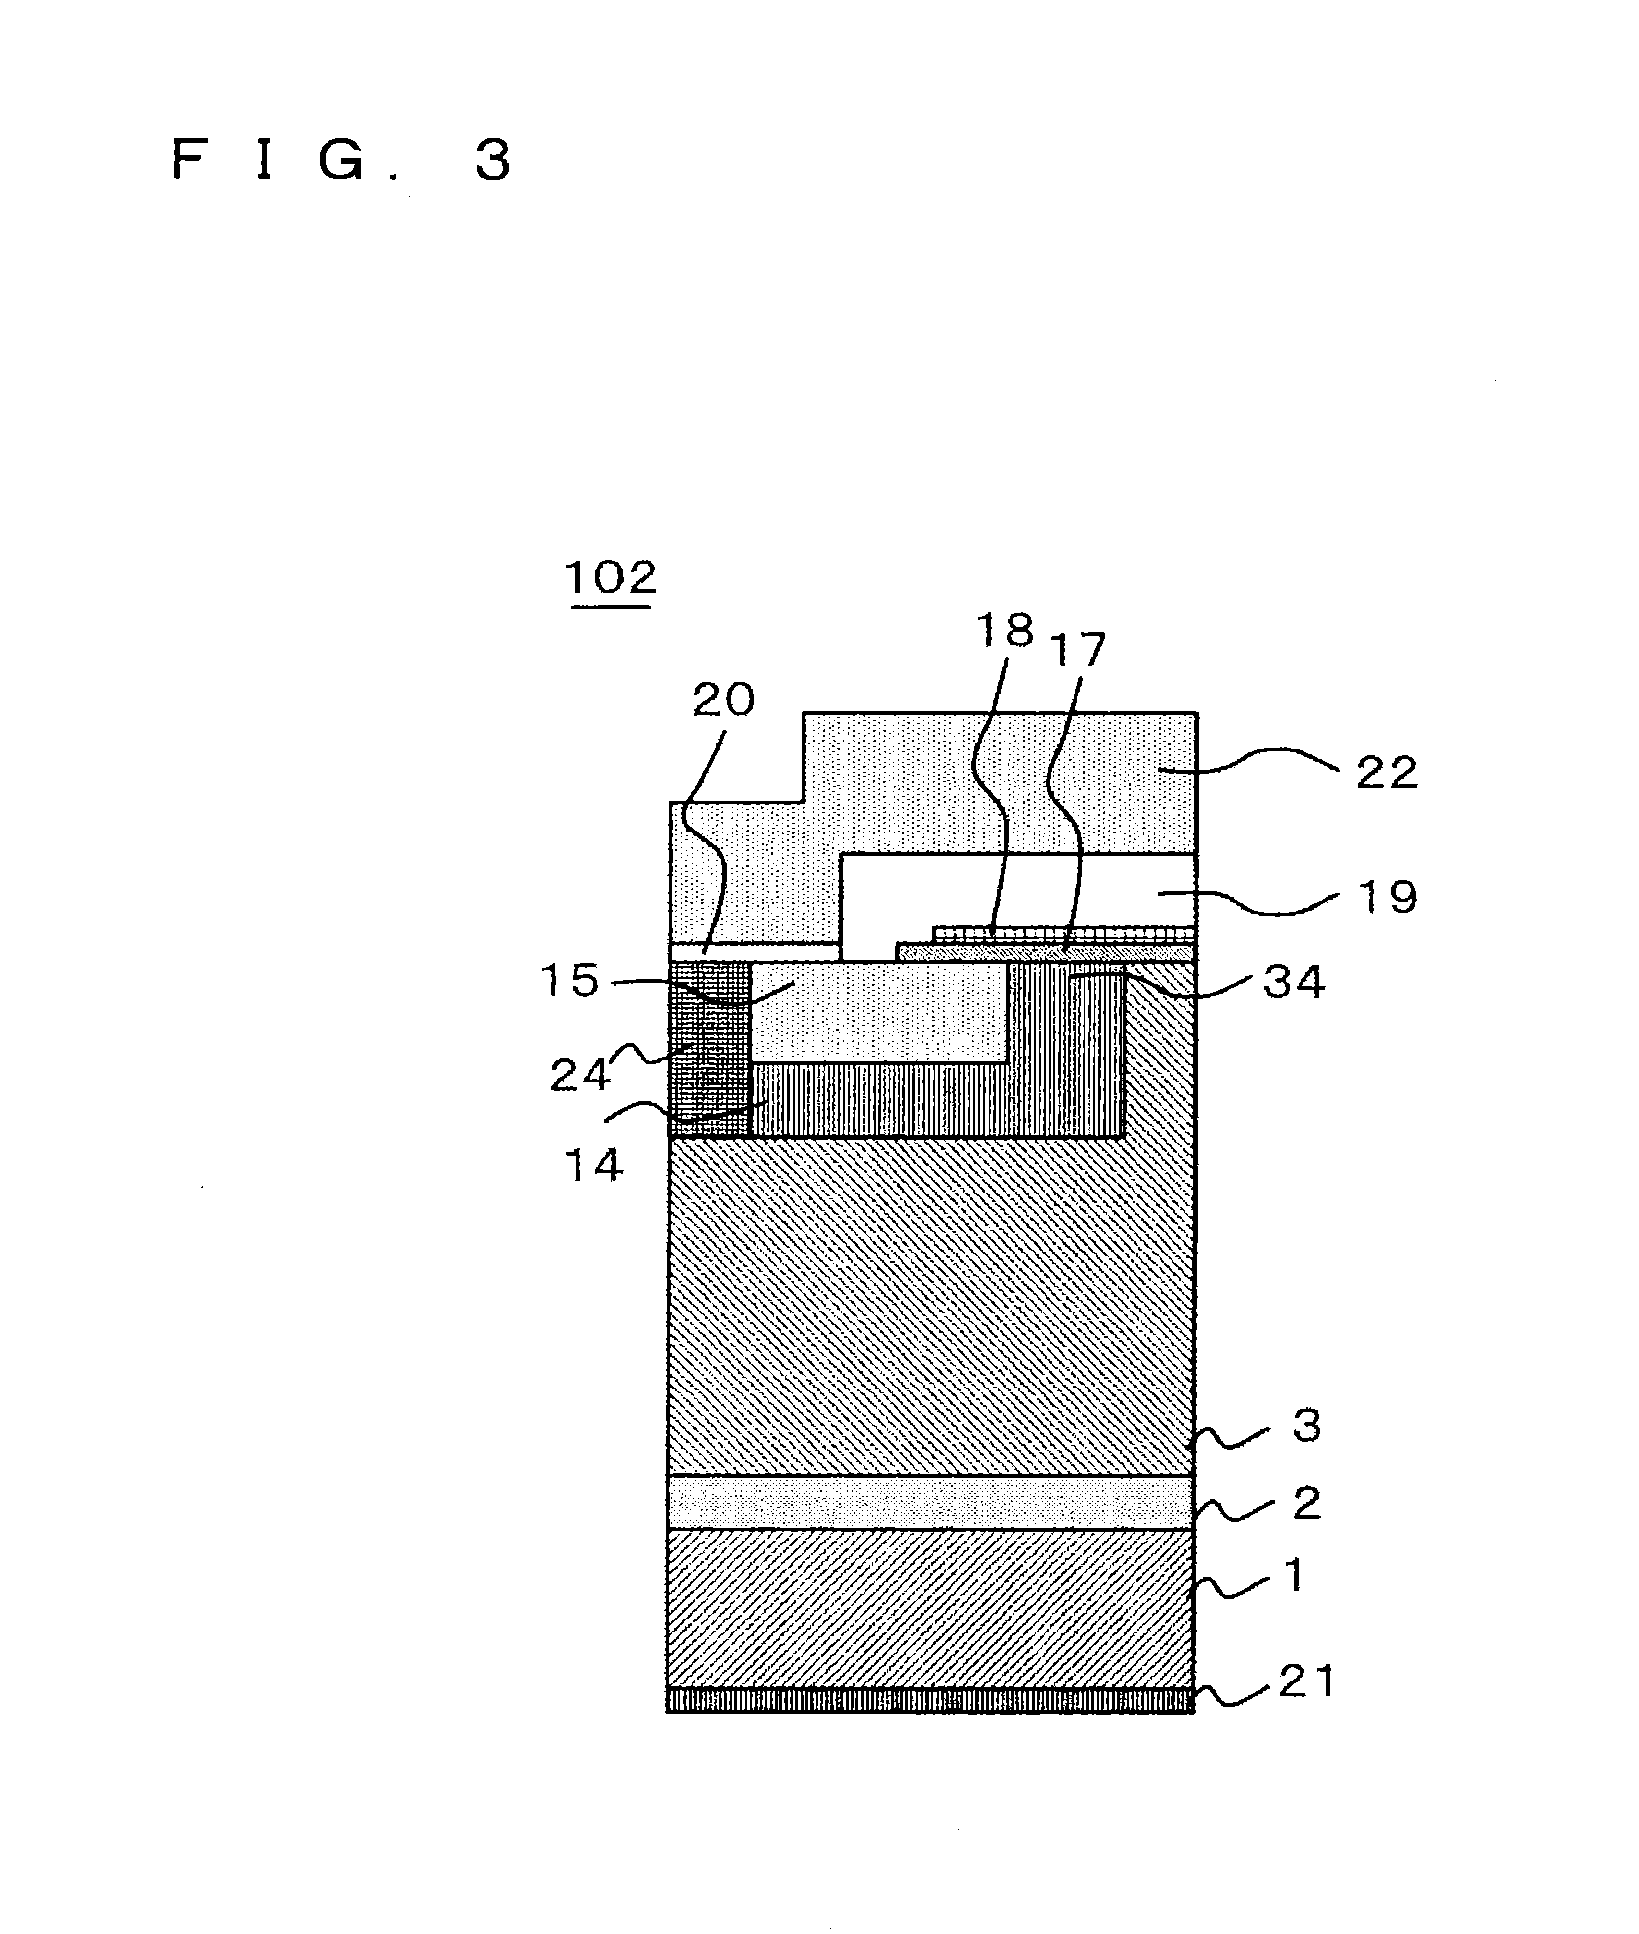 Epitaxial wafer and semiconductor element